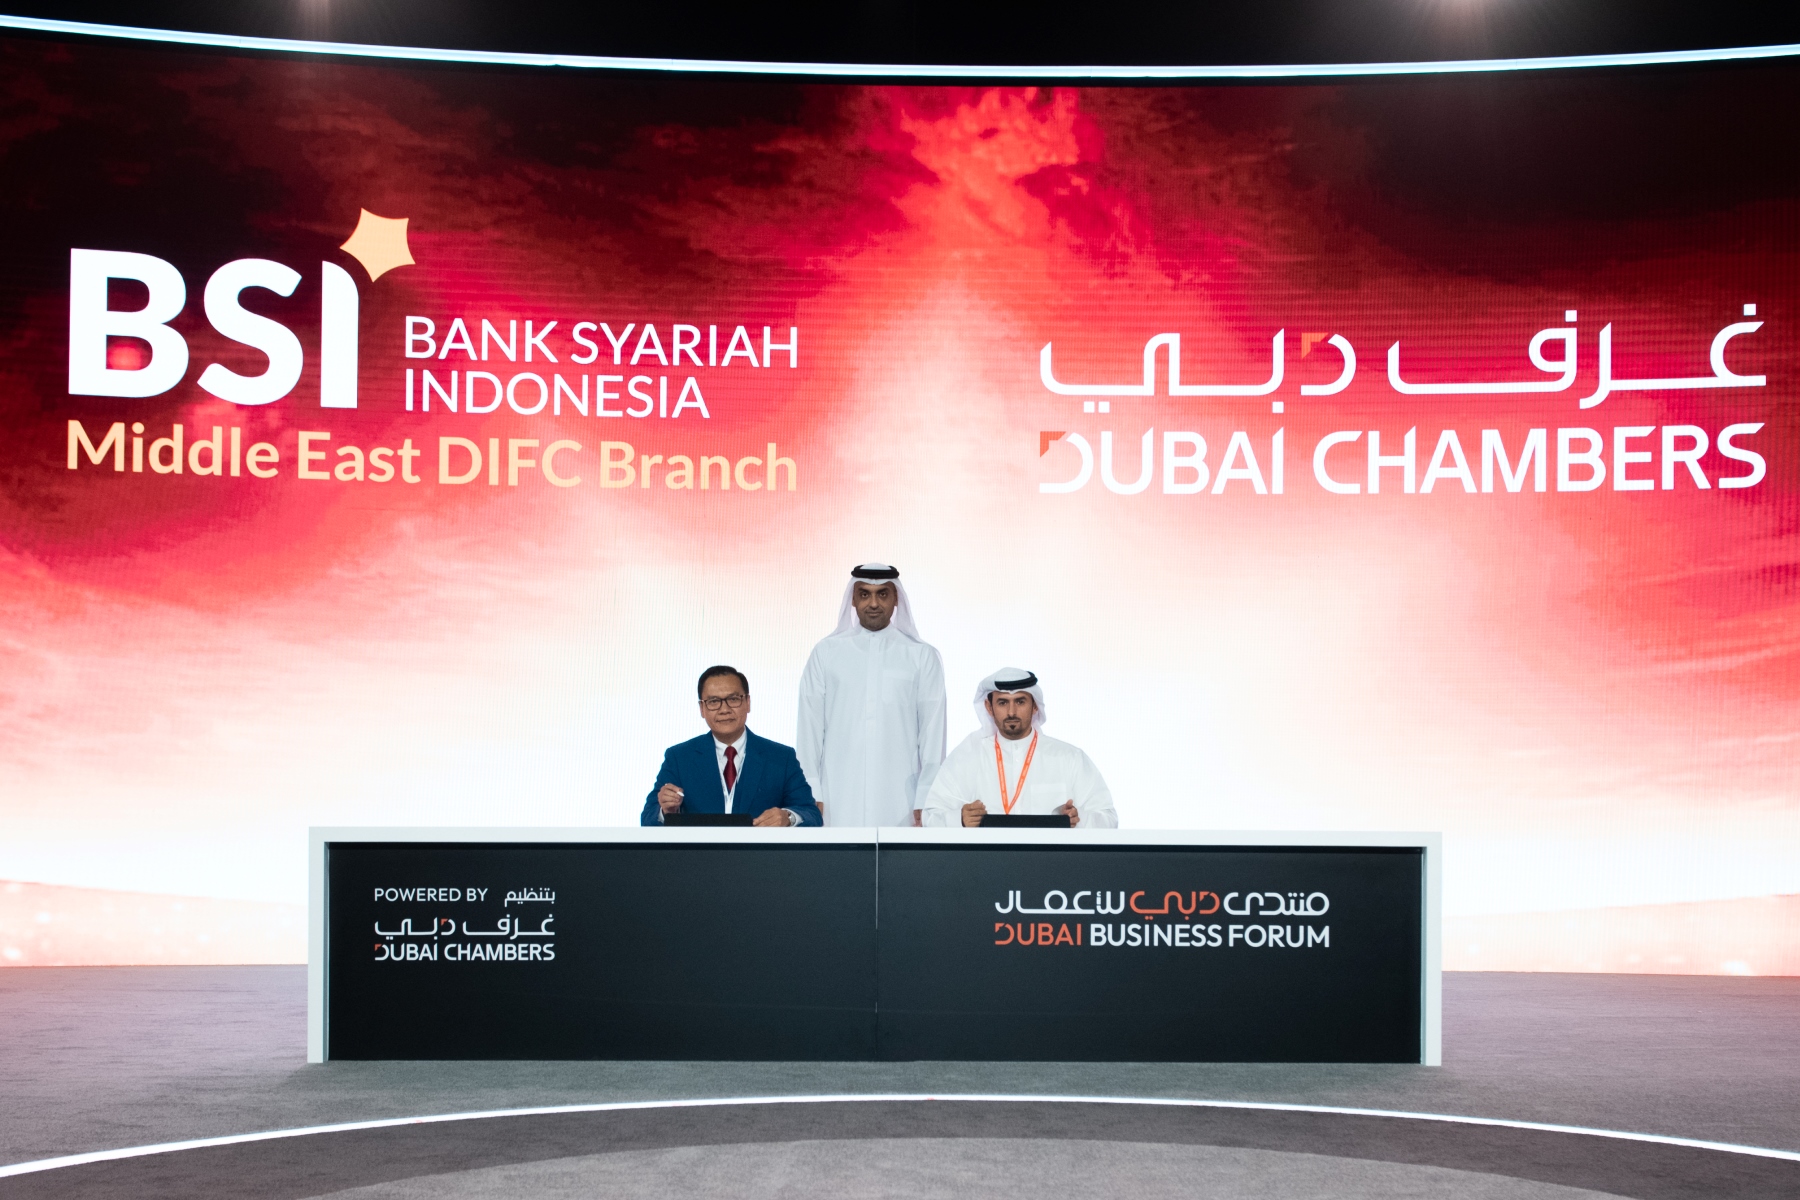 Dubai Chambers signs MoU with PT Bank Syariah Indonesia to exchange knowledge and advance the financial and institutional environment